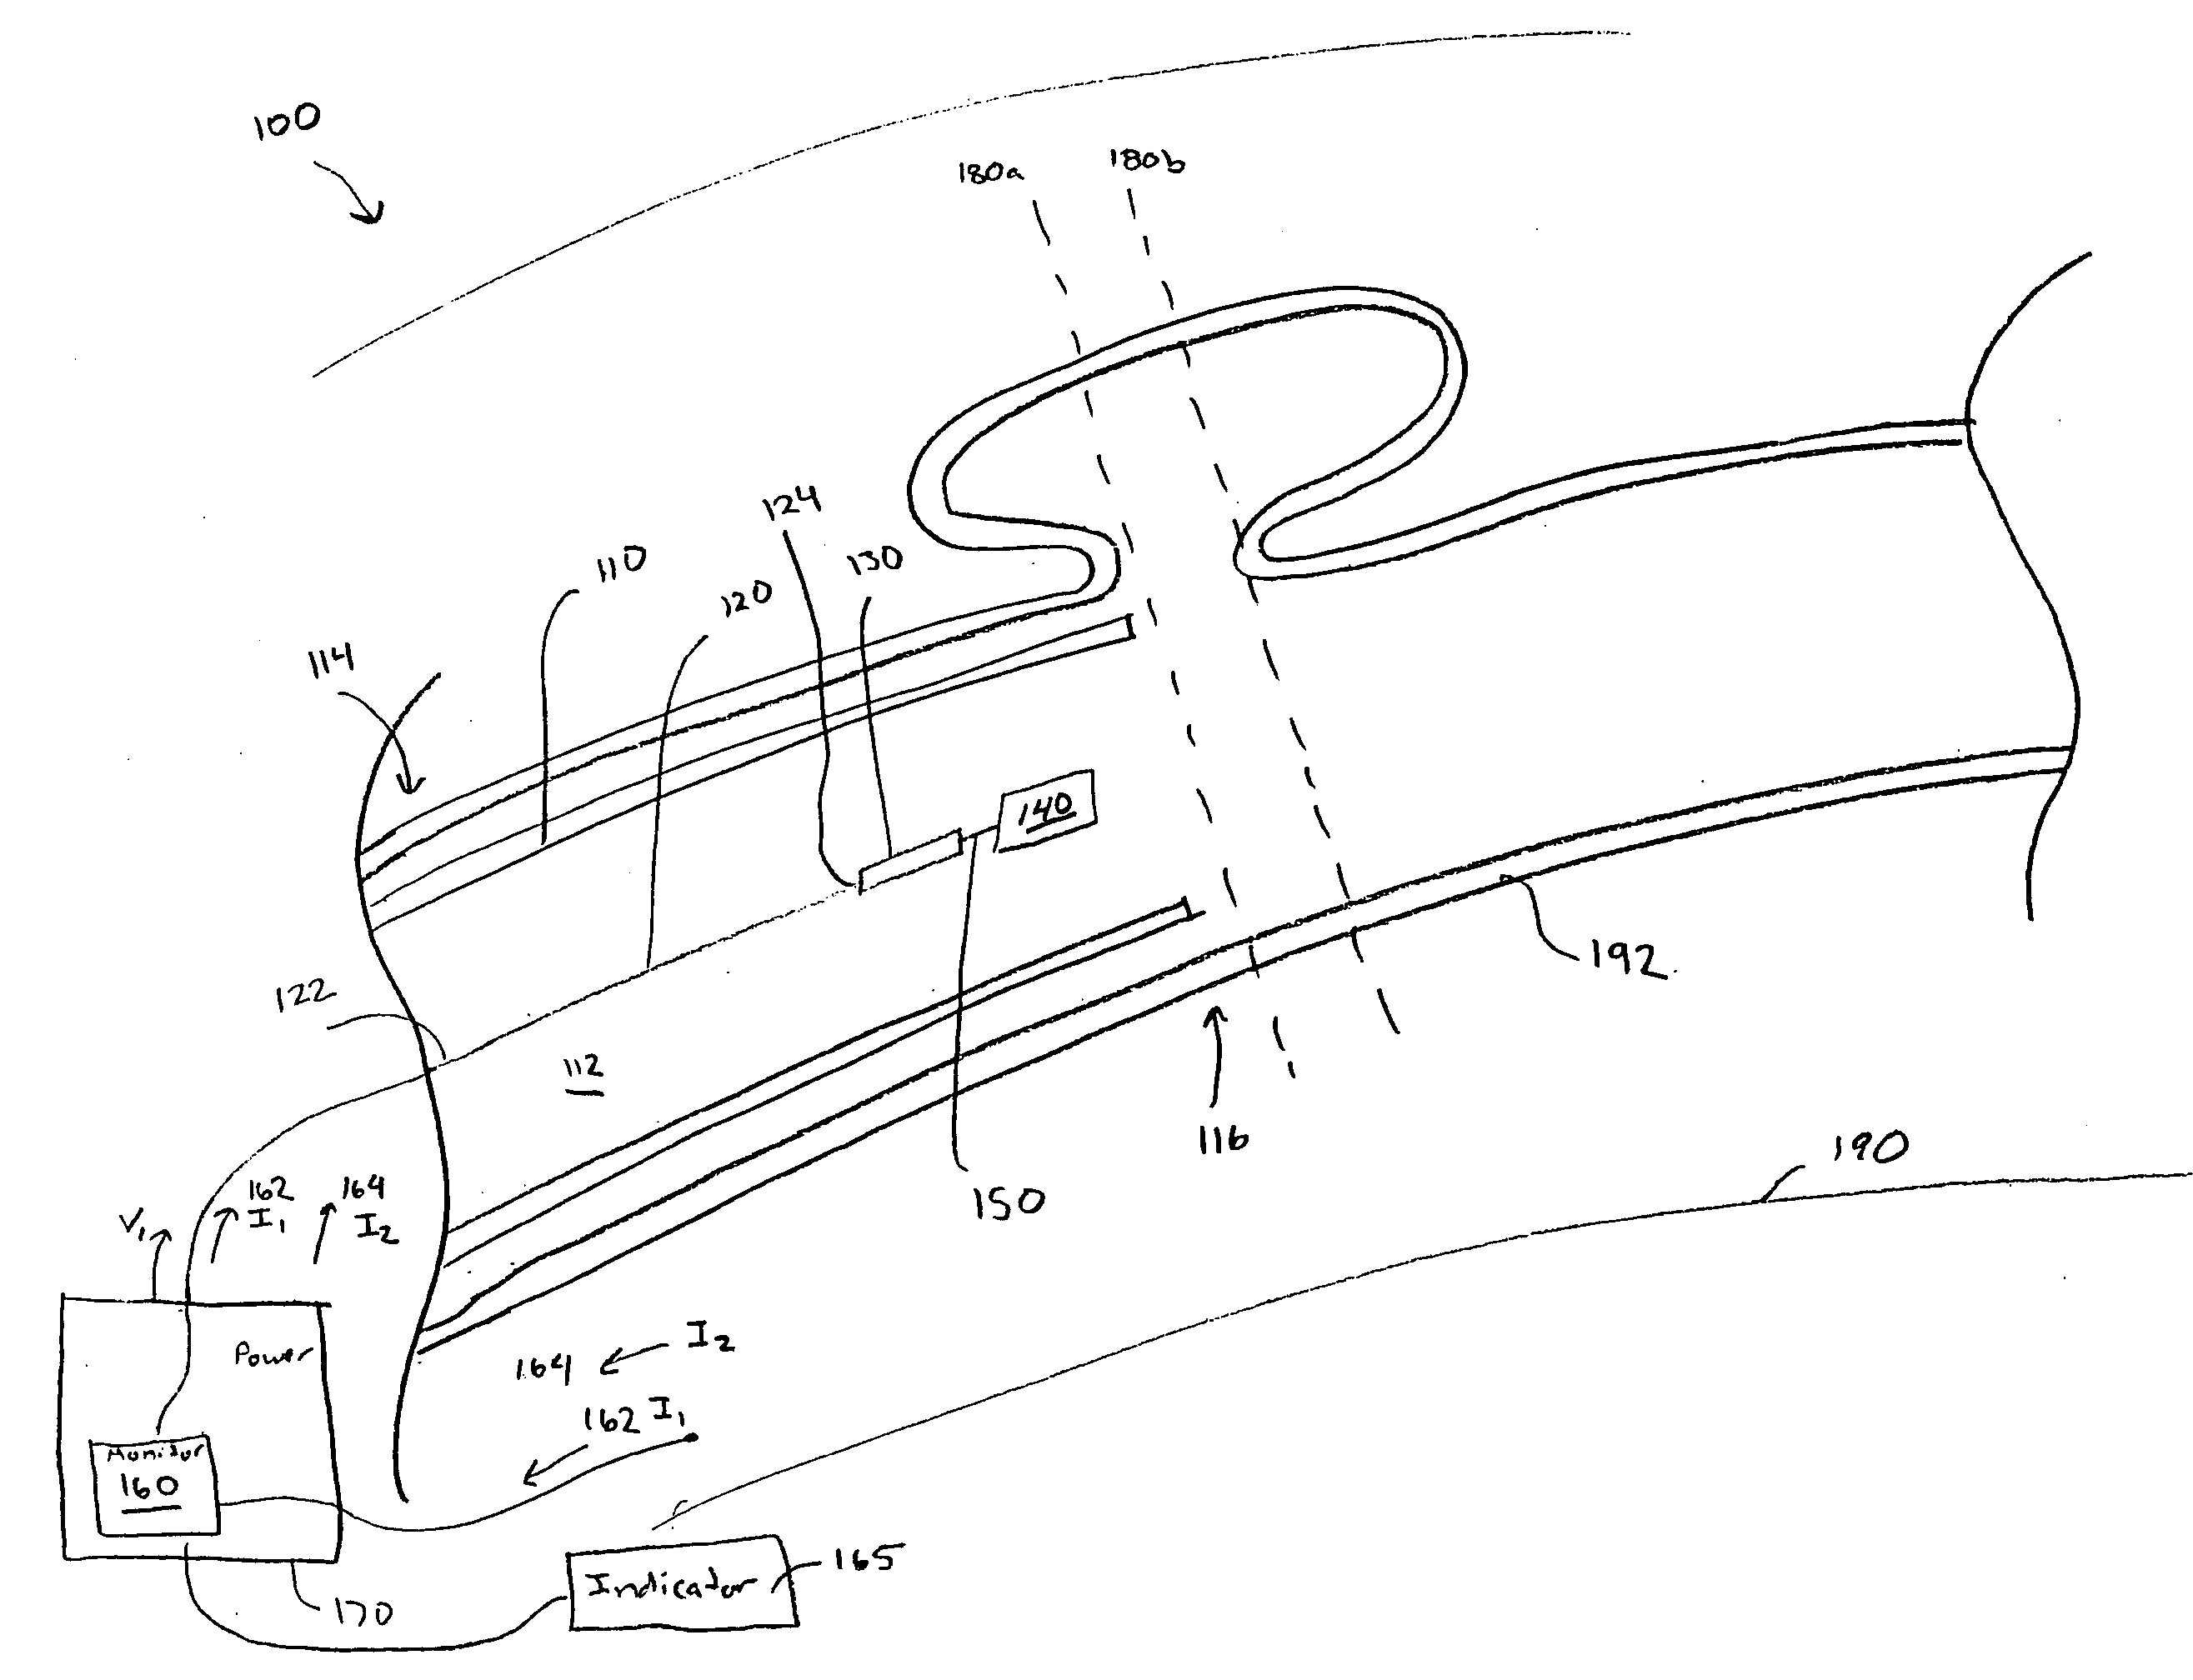 System and method for electrically determining position and detachment of an implantable device